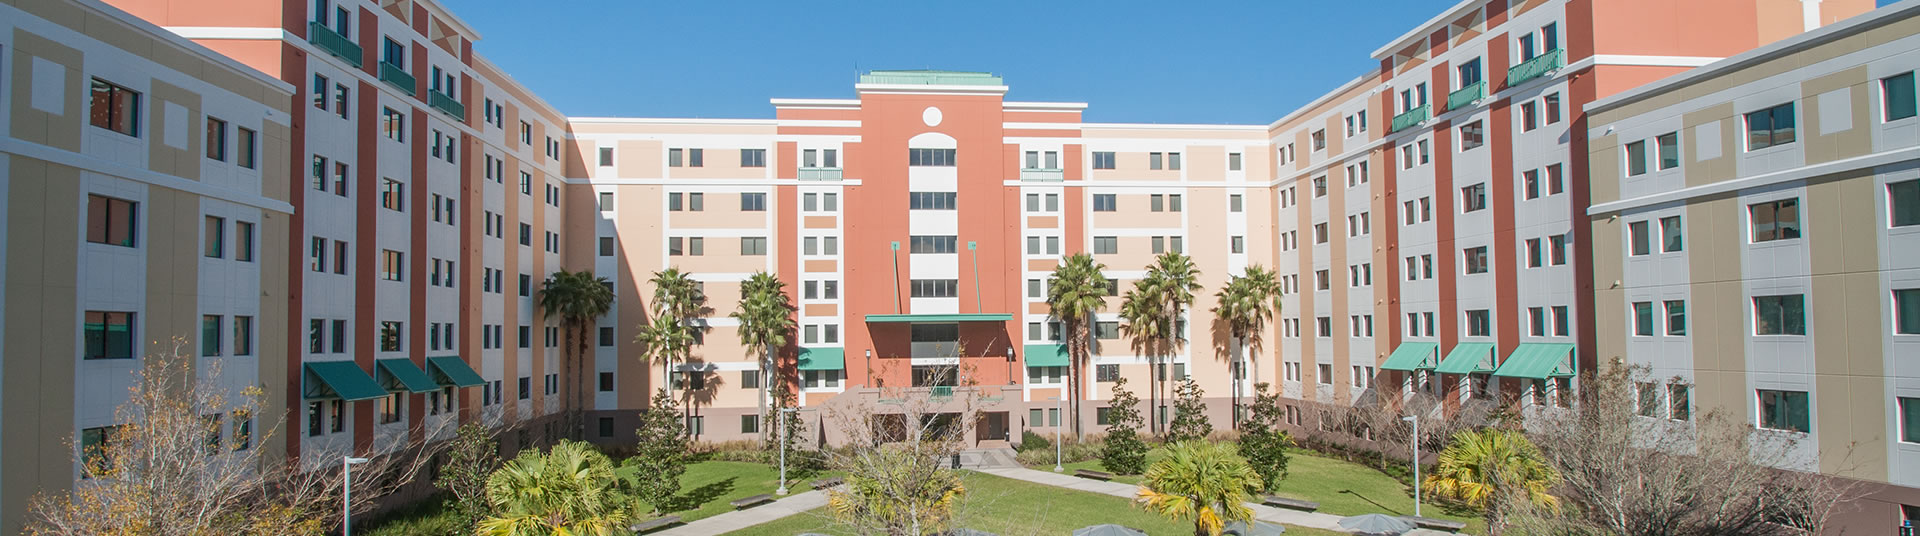 The 5 Best University of Central Florida (UCF) Dorms